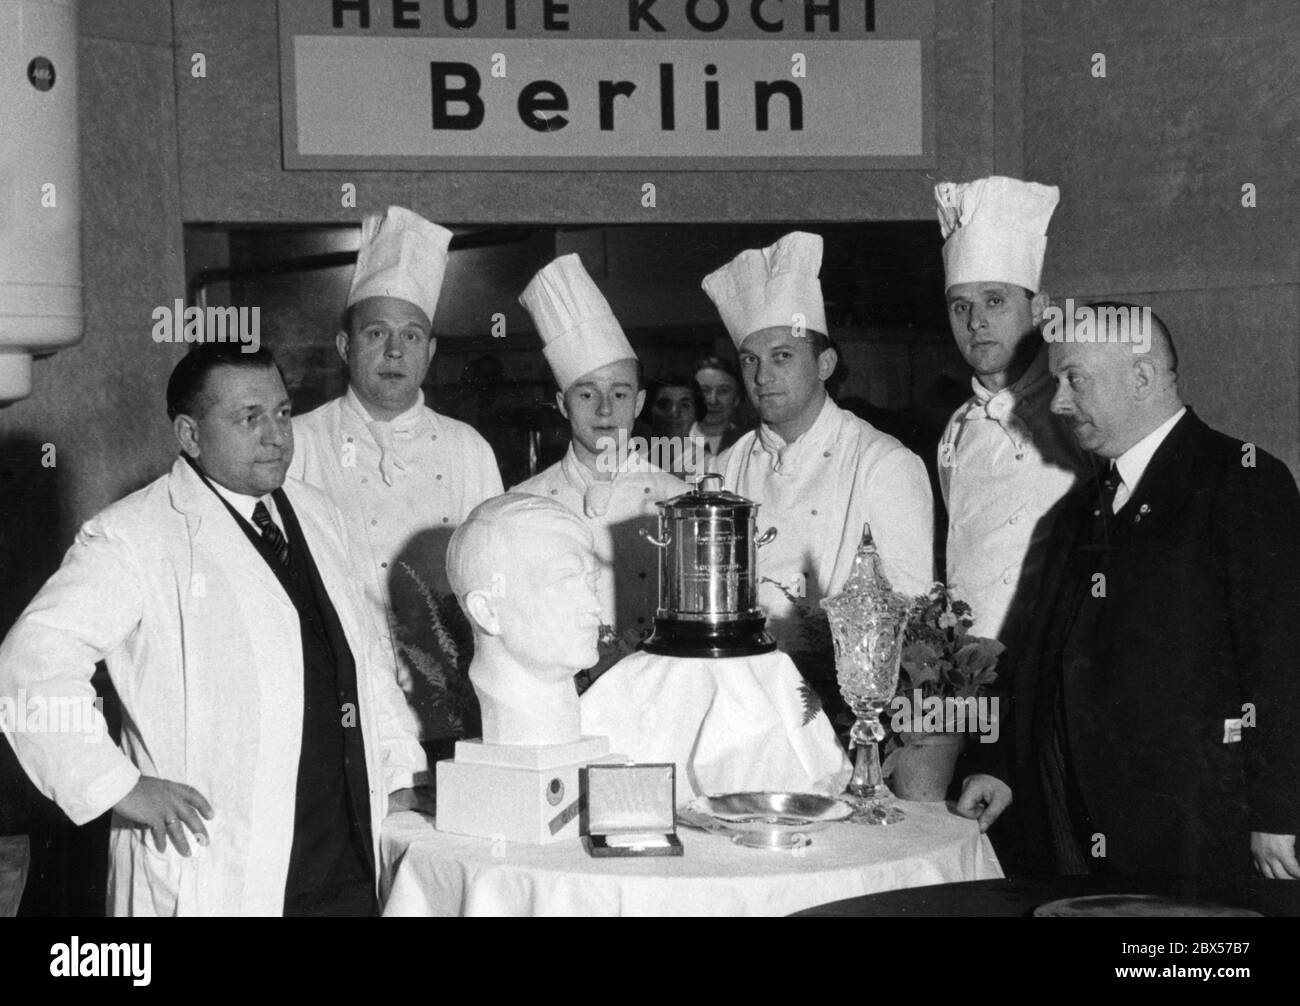 The Berlin chef team has won the 'Golden Marmite' at the 7th International Exhibition of Culinary Art. The head chef has a party badge of the NSDAP and on the table there is a porcelain Hitler head. On the photo from left: Kurt Villbrandt, Peter Saueressig, Paul Oechsler (Eden-Hotel), Wilhelm Rueb (Pauquet), Kurt Moritz (Kaiserhof), Grueger (Gaufachgruppenwalter). Stock Photo